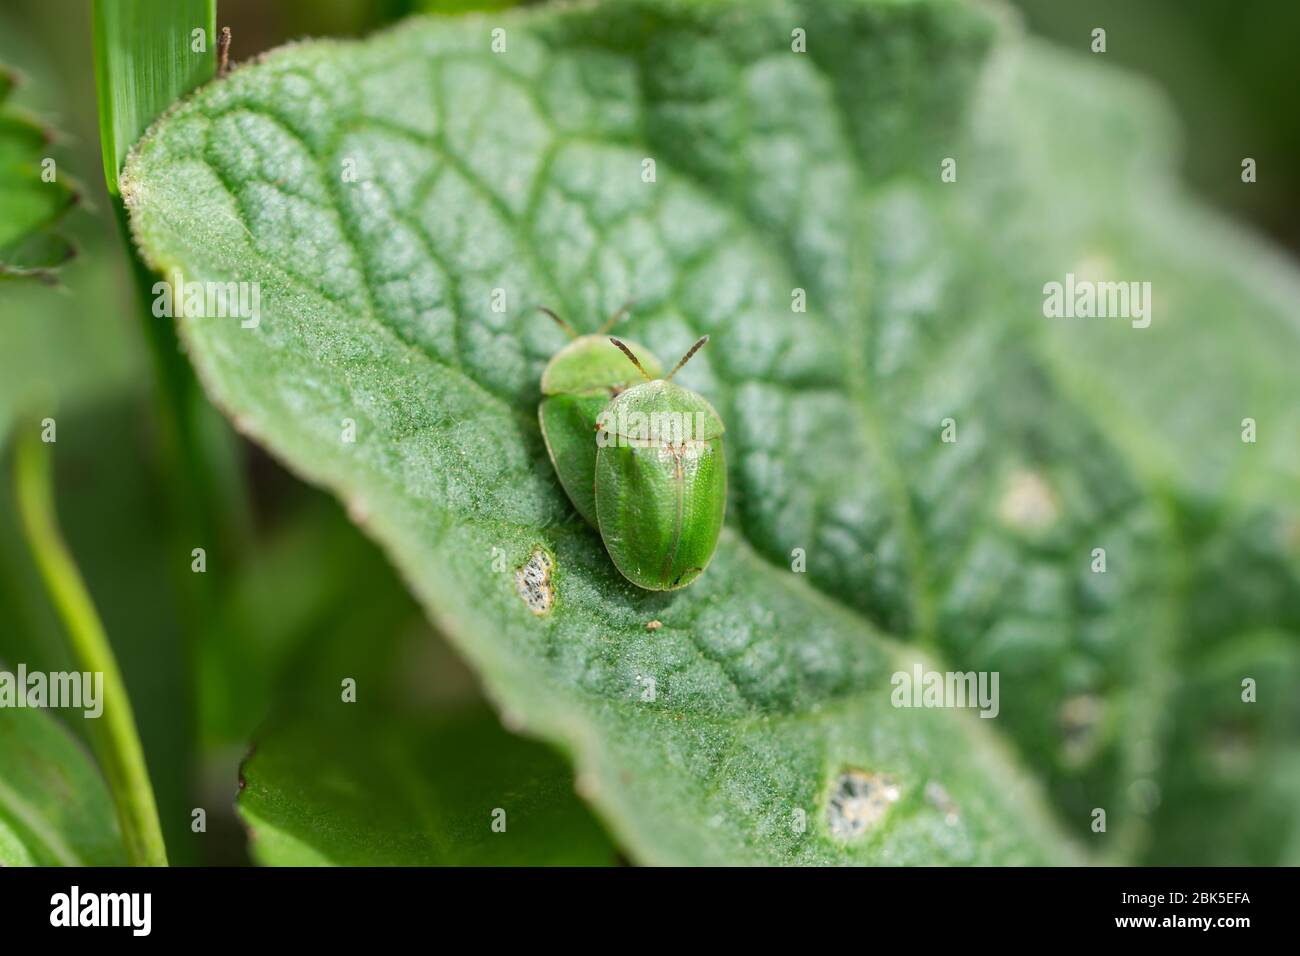 Thistle Tortoise Beetles Mating in Springtime Stock Photo